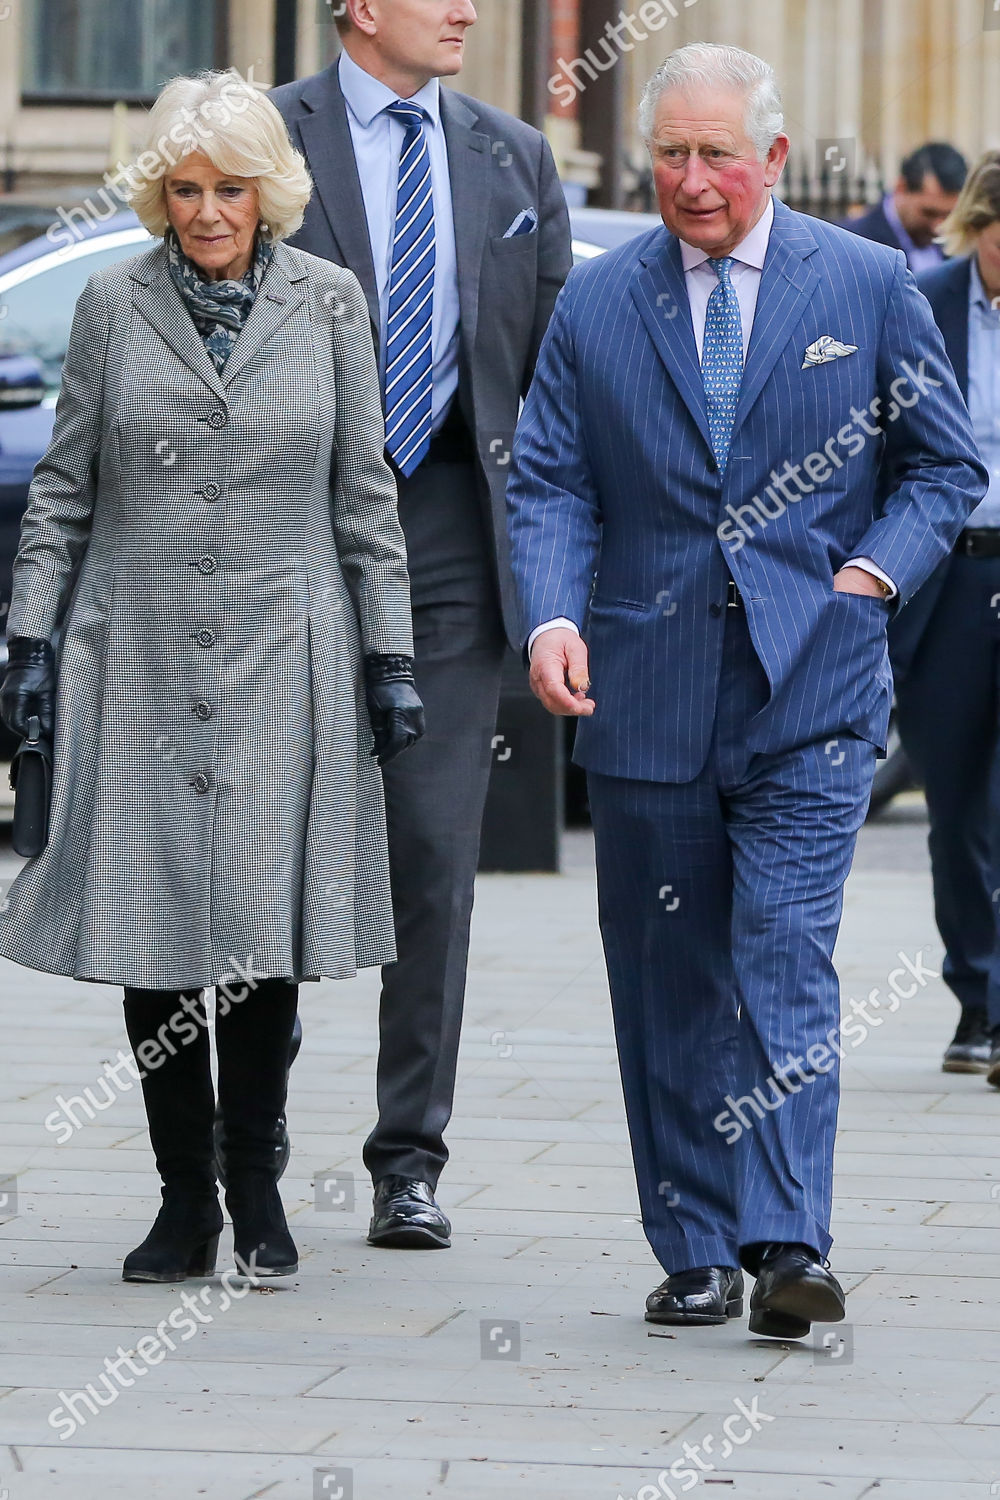 prince-charles-and-camilla-duchess-of-cornwall-visit-to-the-supreme-court-london-uk-shutterstock-editorial-10088523b.jpg